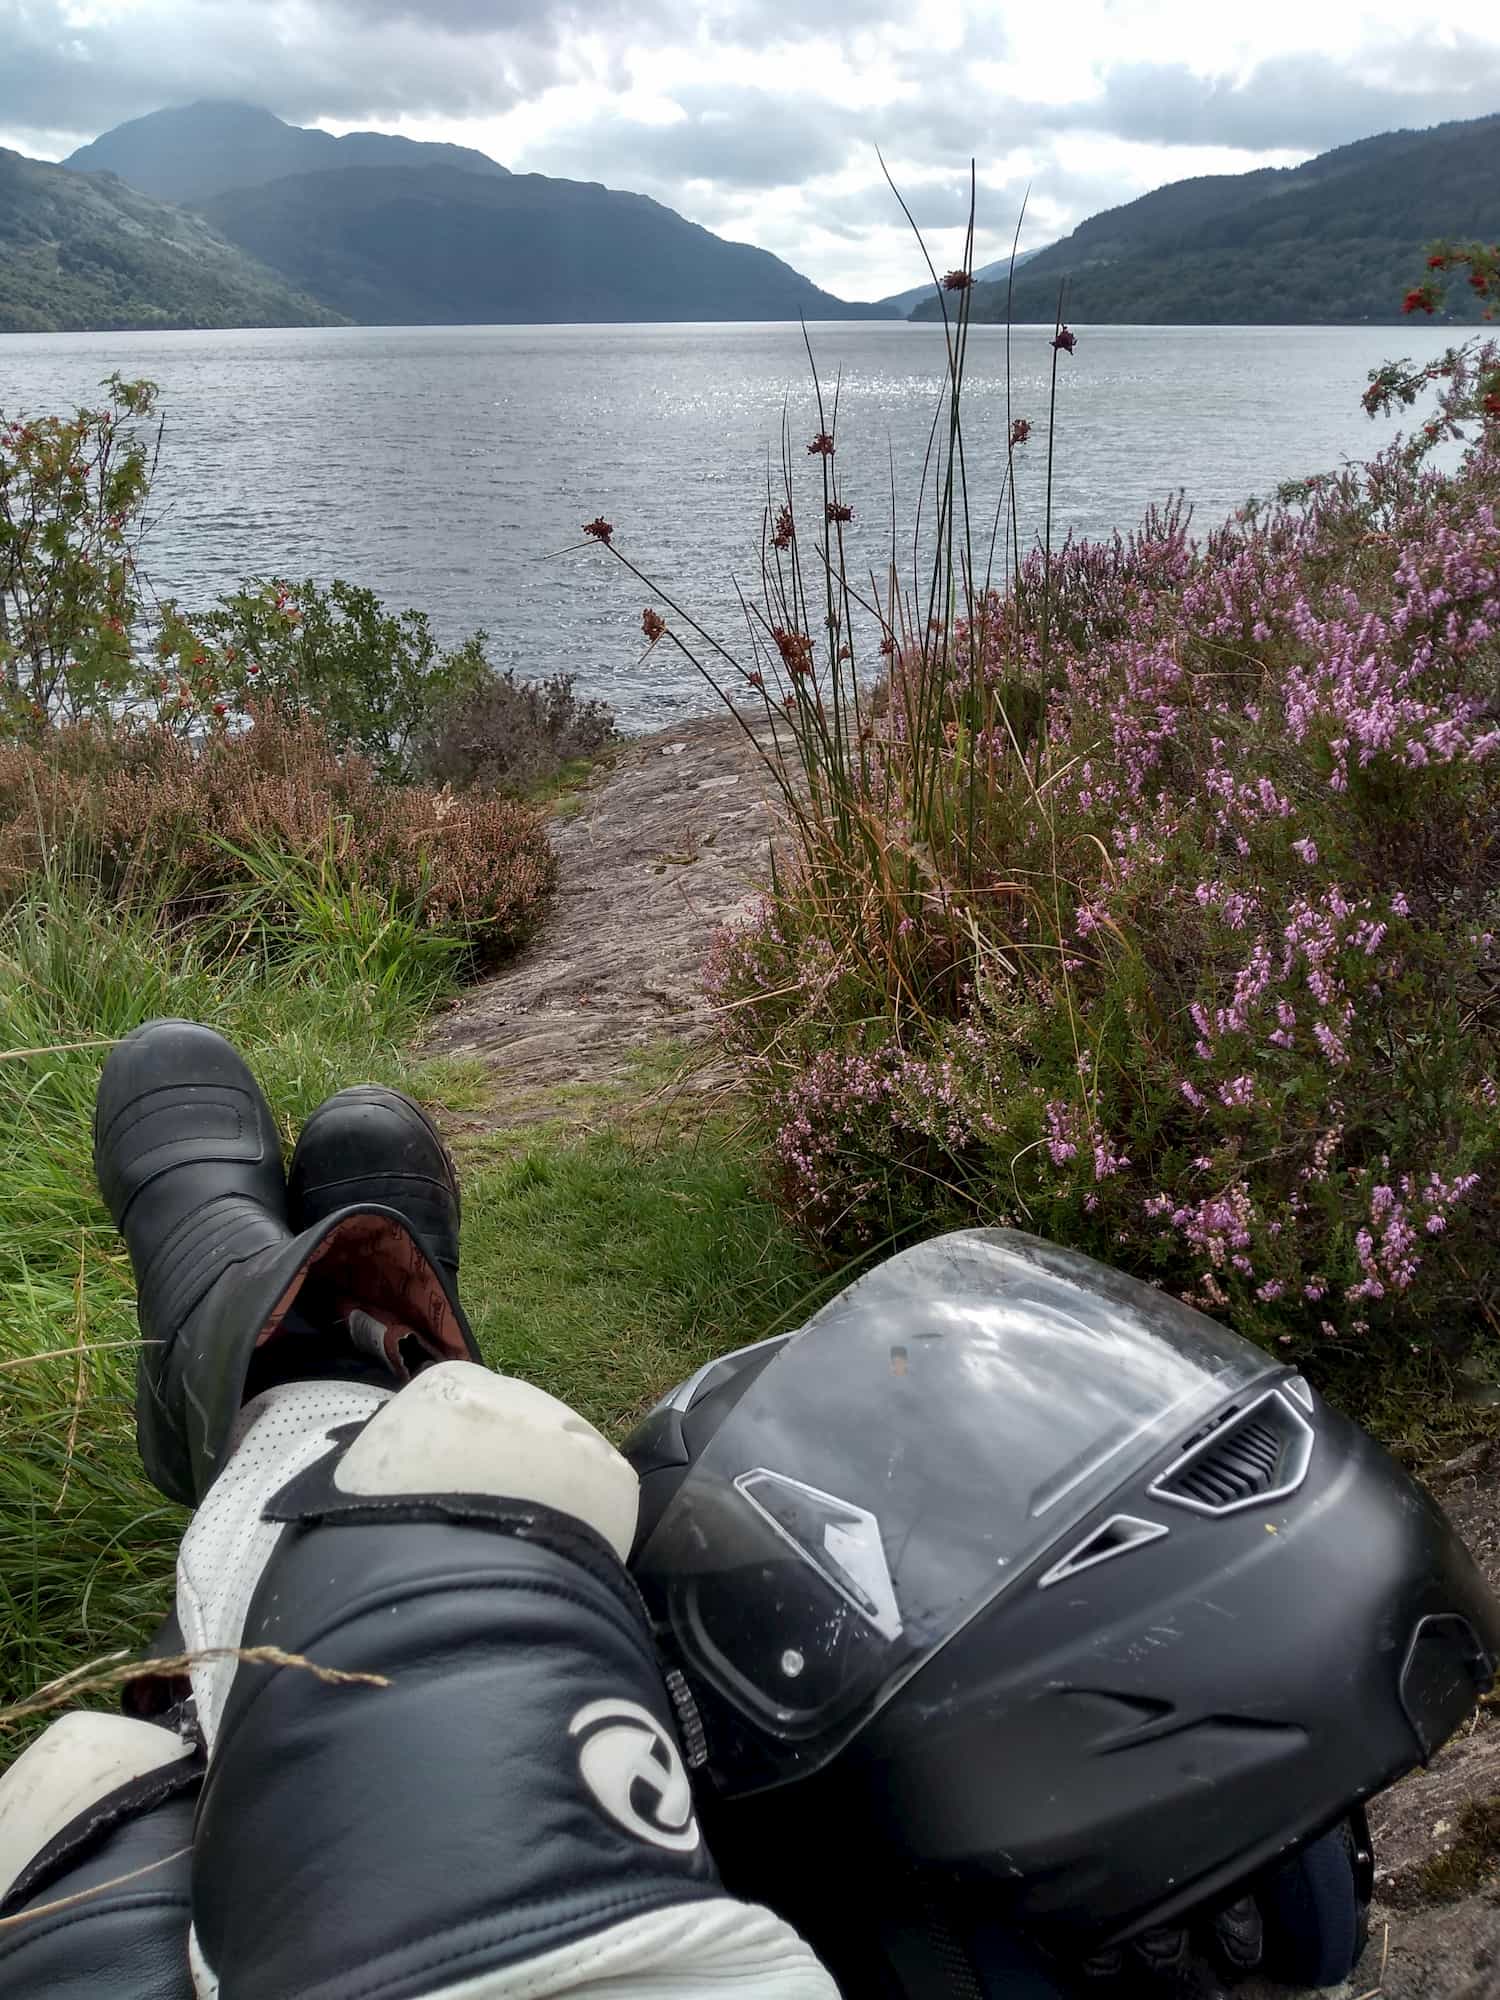 Legs of author wearing bike trouser leathers and boots, with helmet next to boots, surrounded by heather and looking out over Loch Lomond